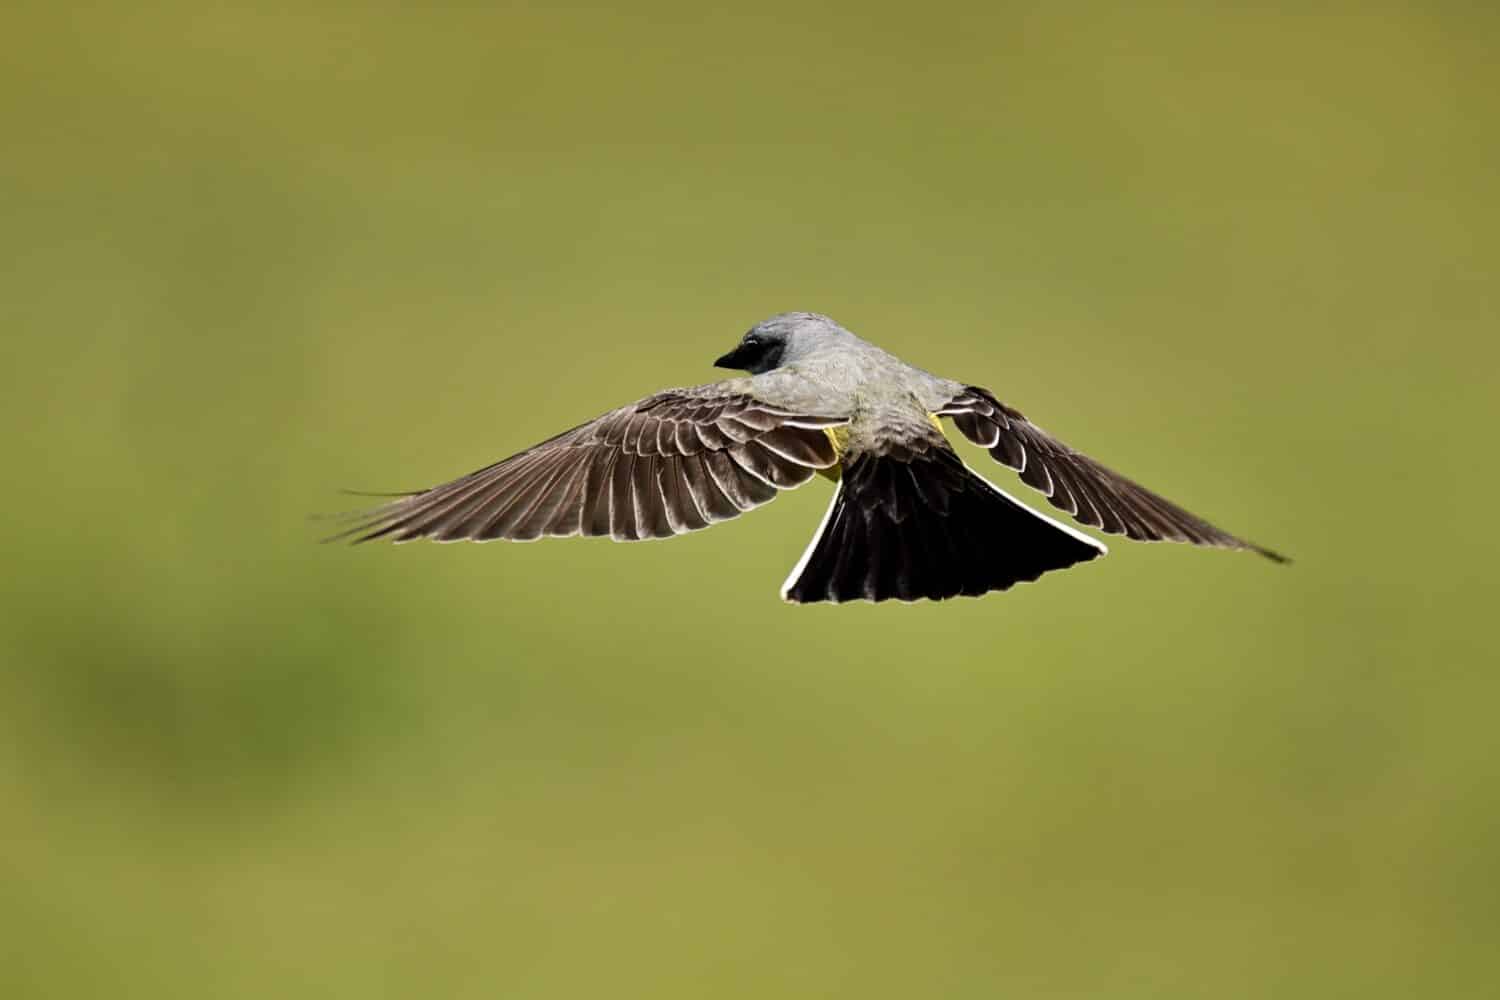 Western Kingbird hovering over grass hunting for insects